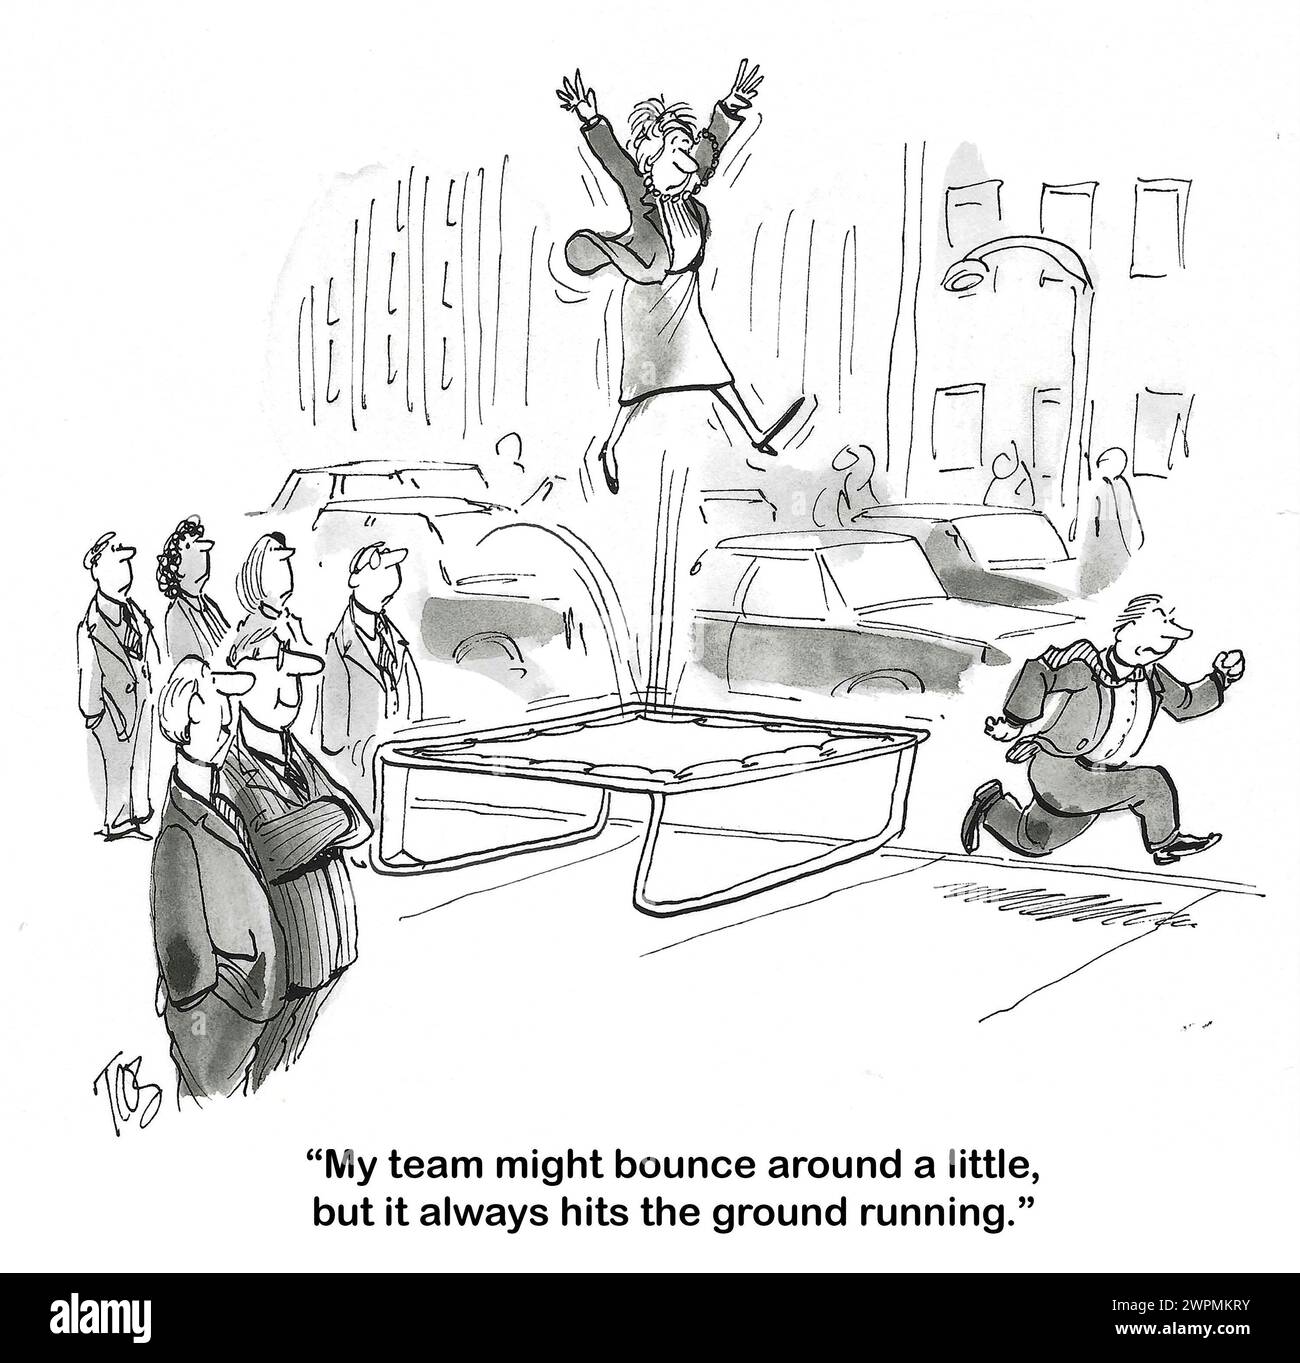 BW cartoon of a business team jumping on a huge trampoline, but they do hit the ground running and prepared. Stock Photo